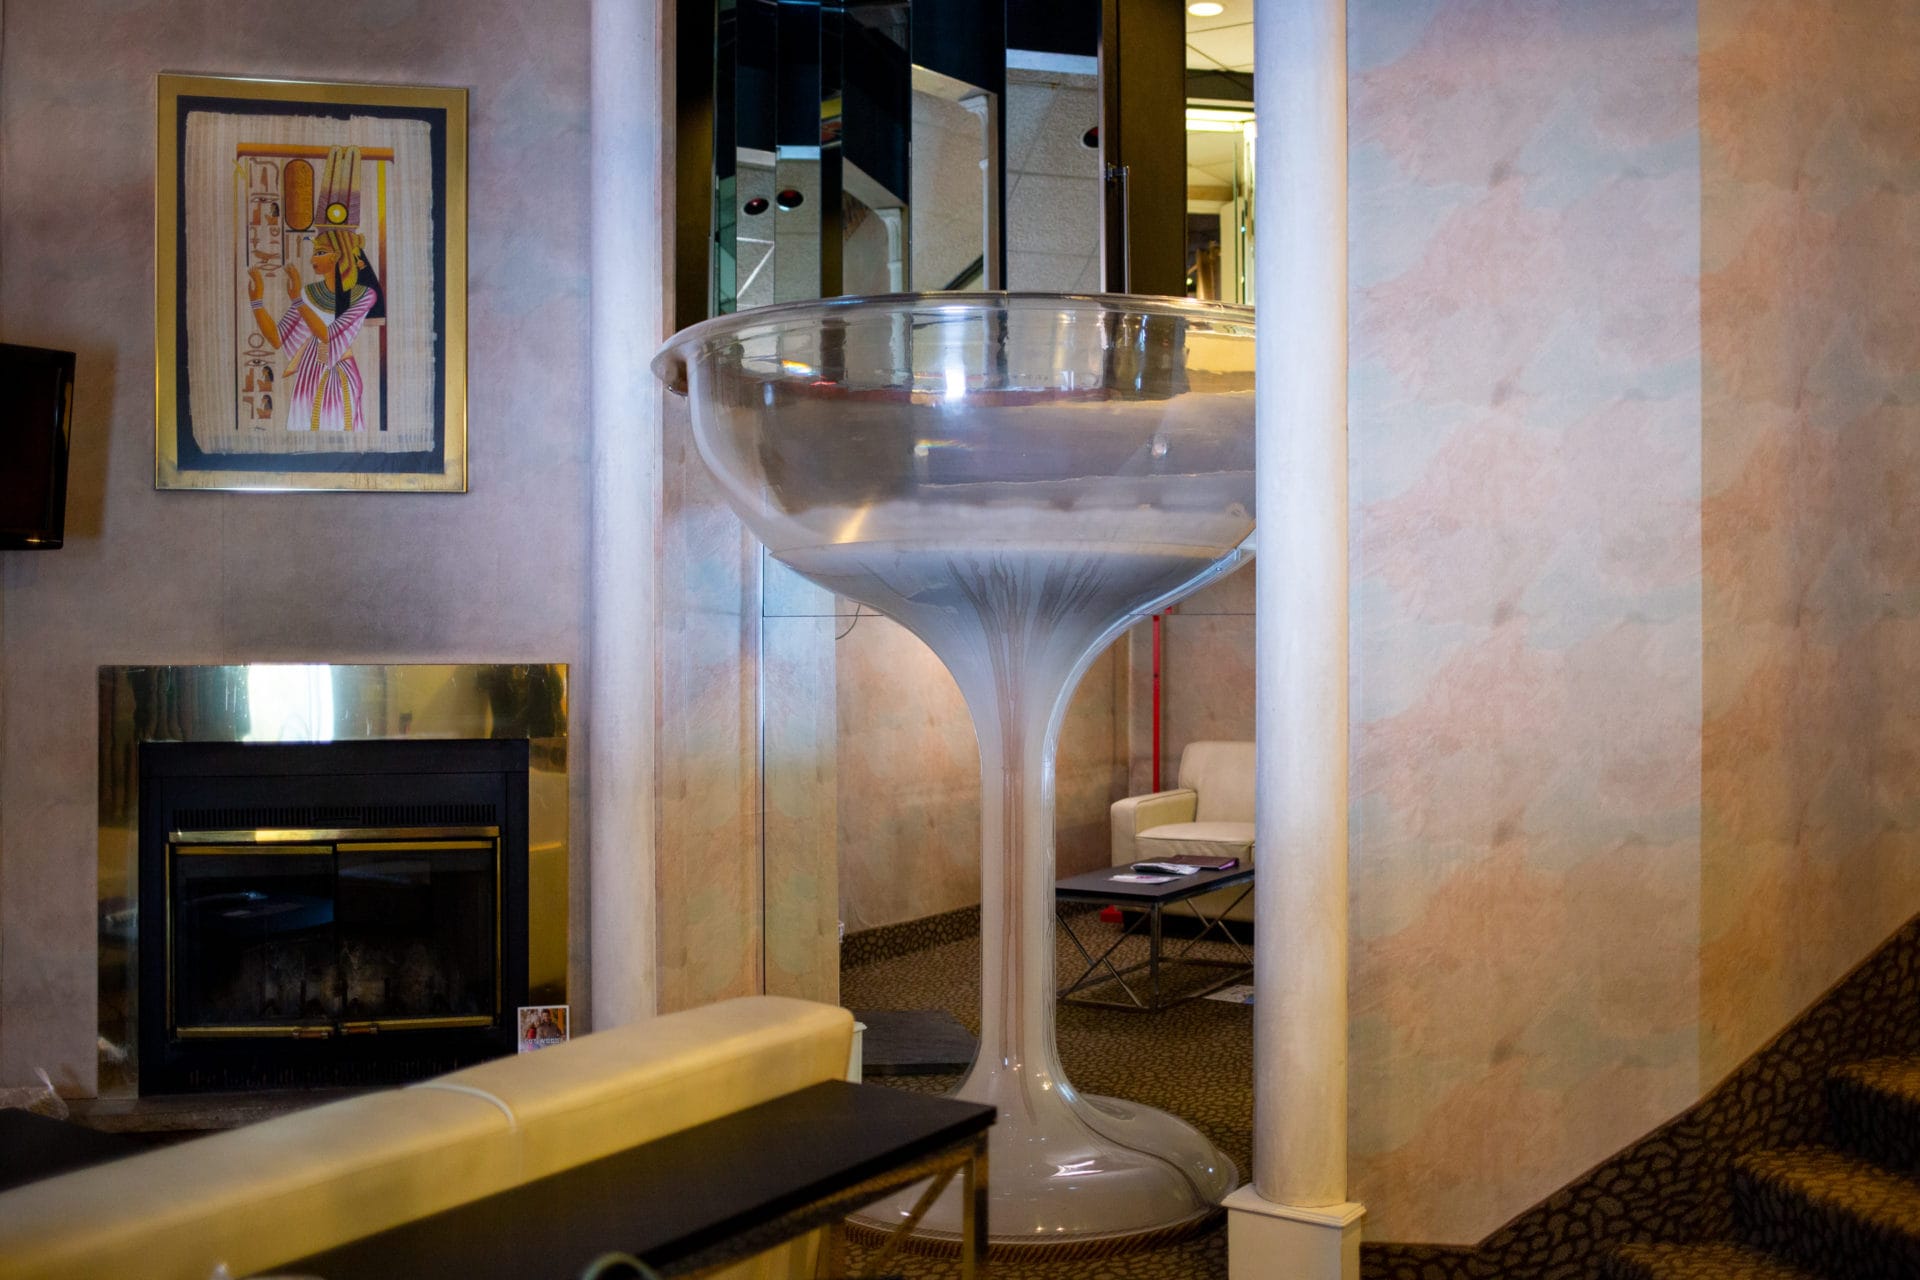 A two-story hotel room with a 7-foot-tall champagne glass-shaped bathtub in the center.